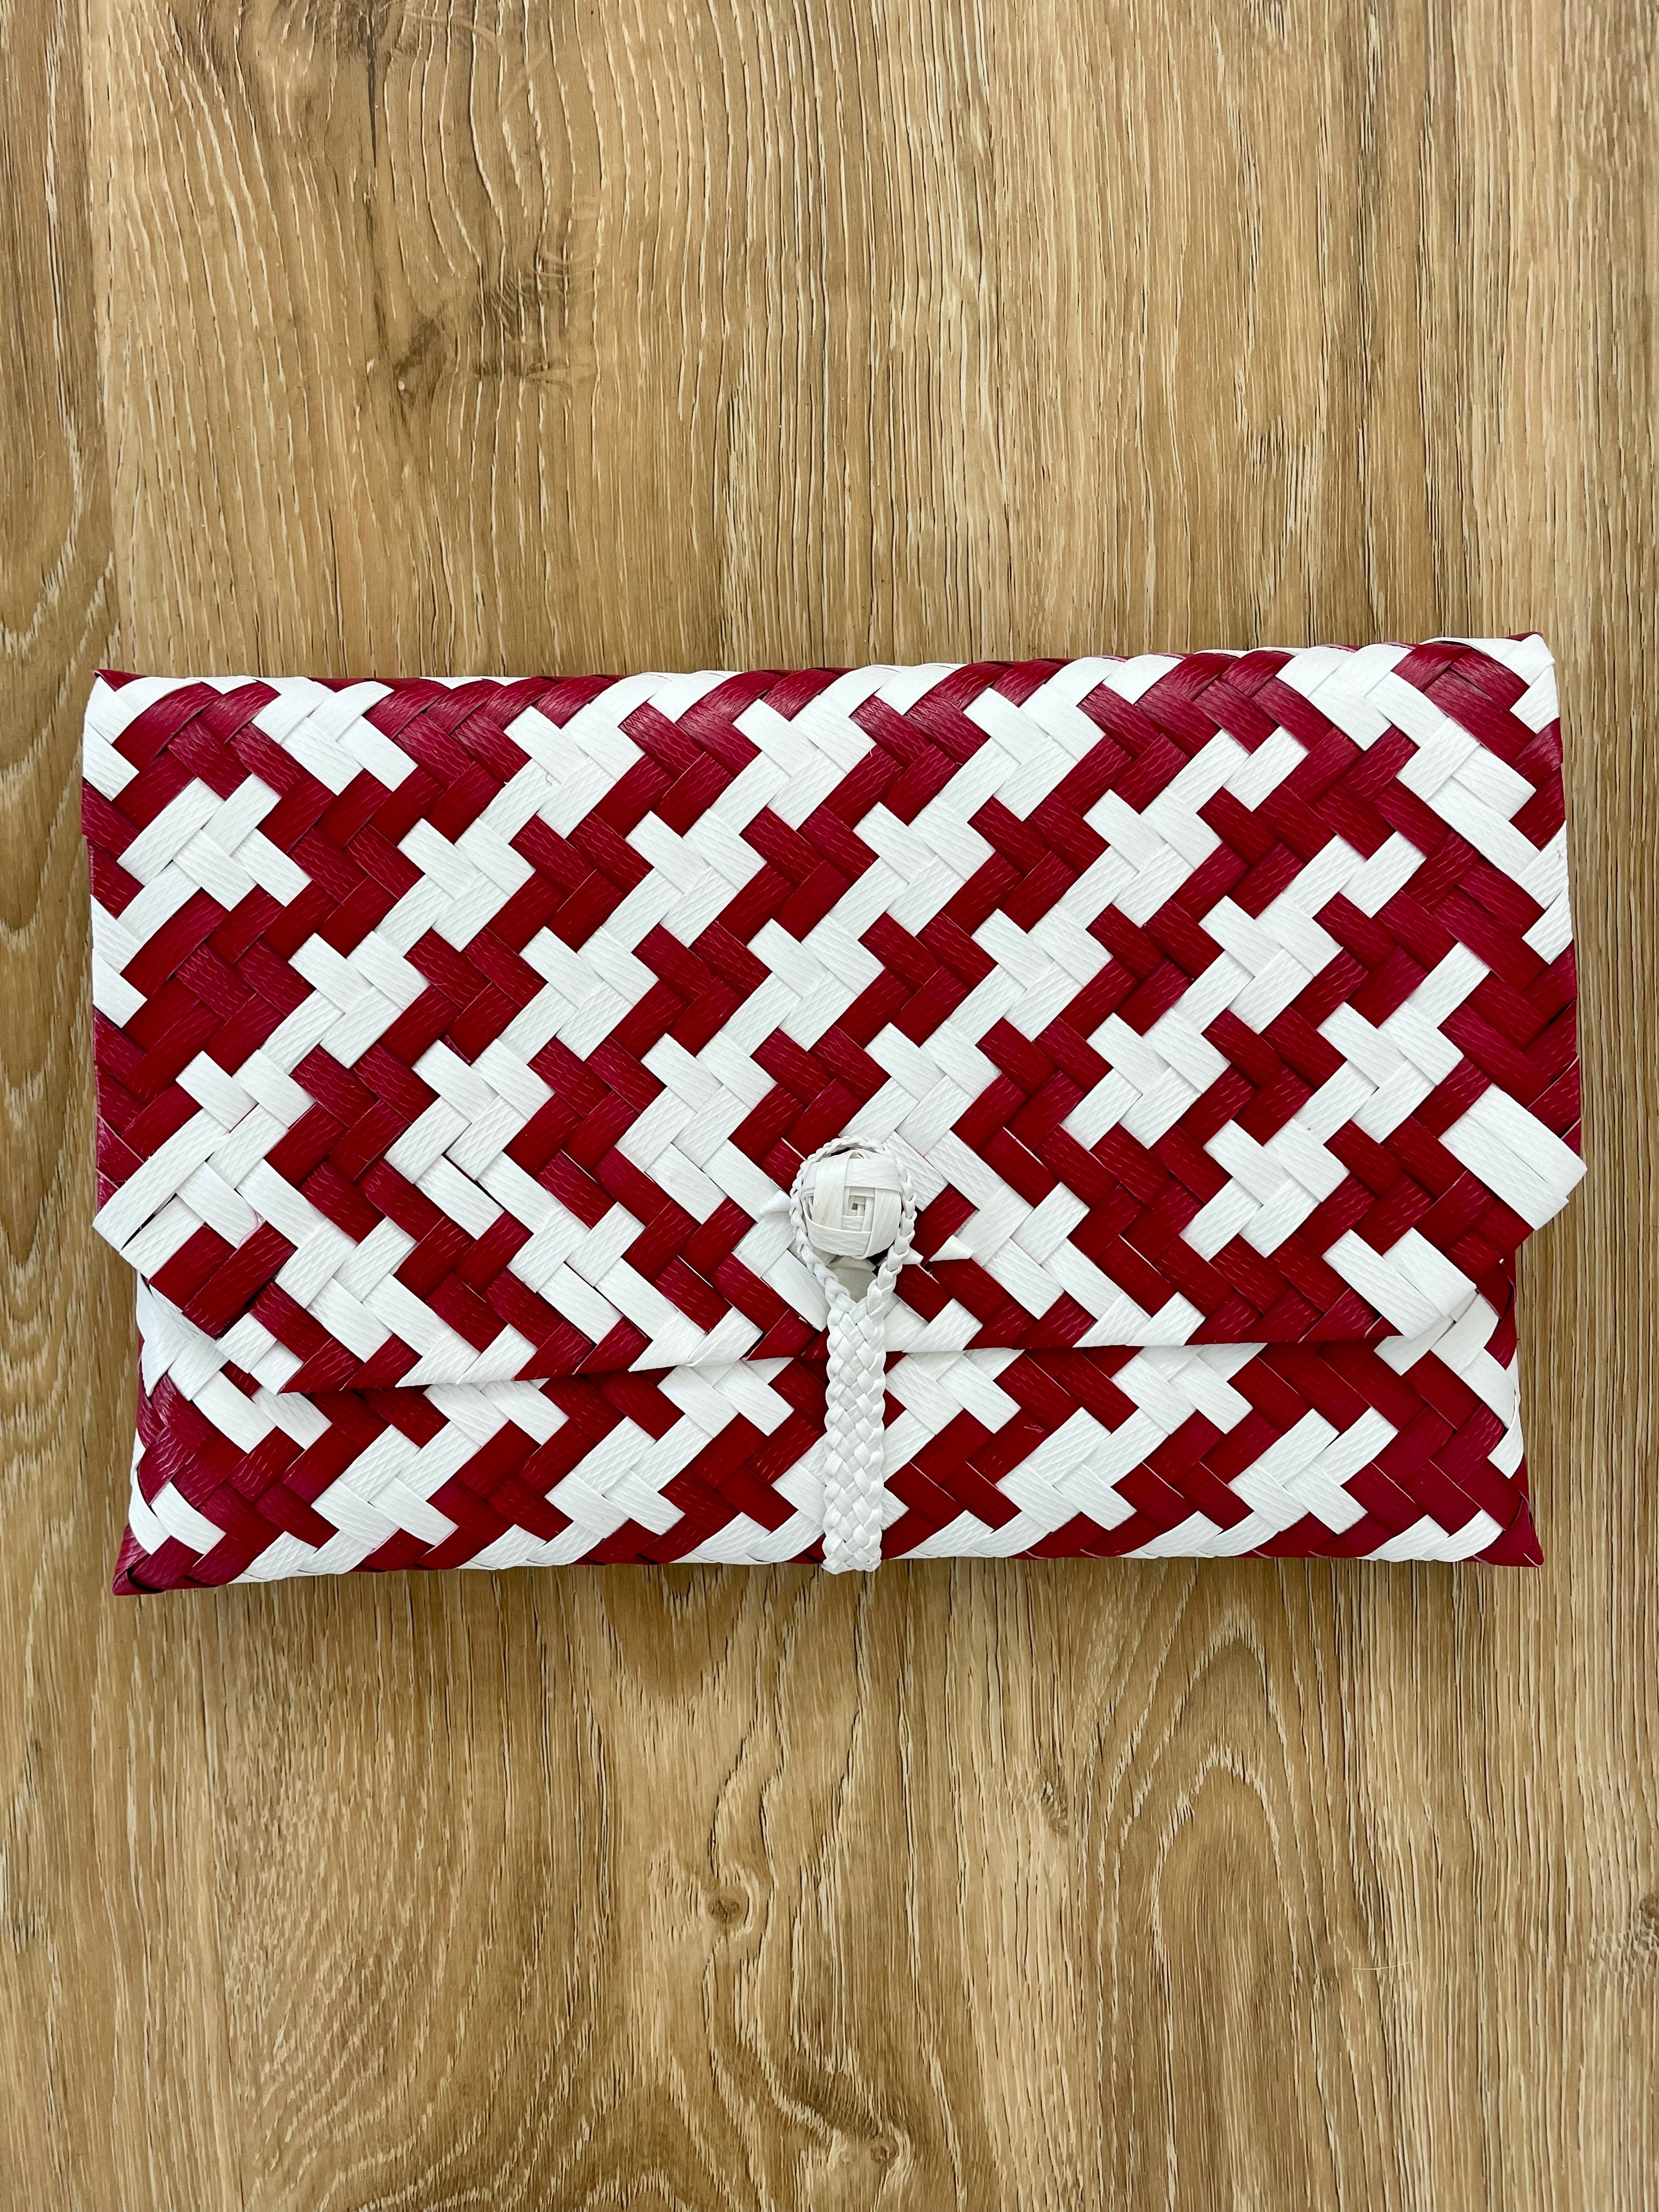 Rose Red & White Patterned Clutch